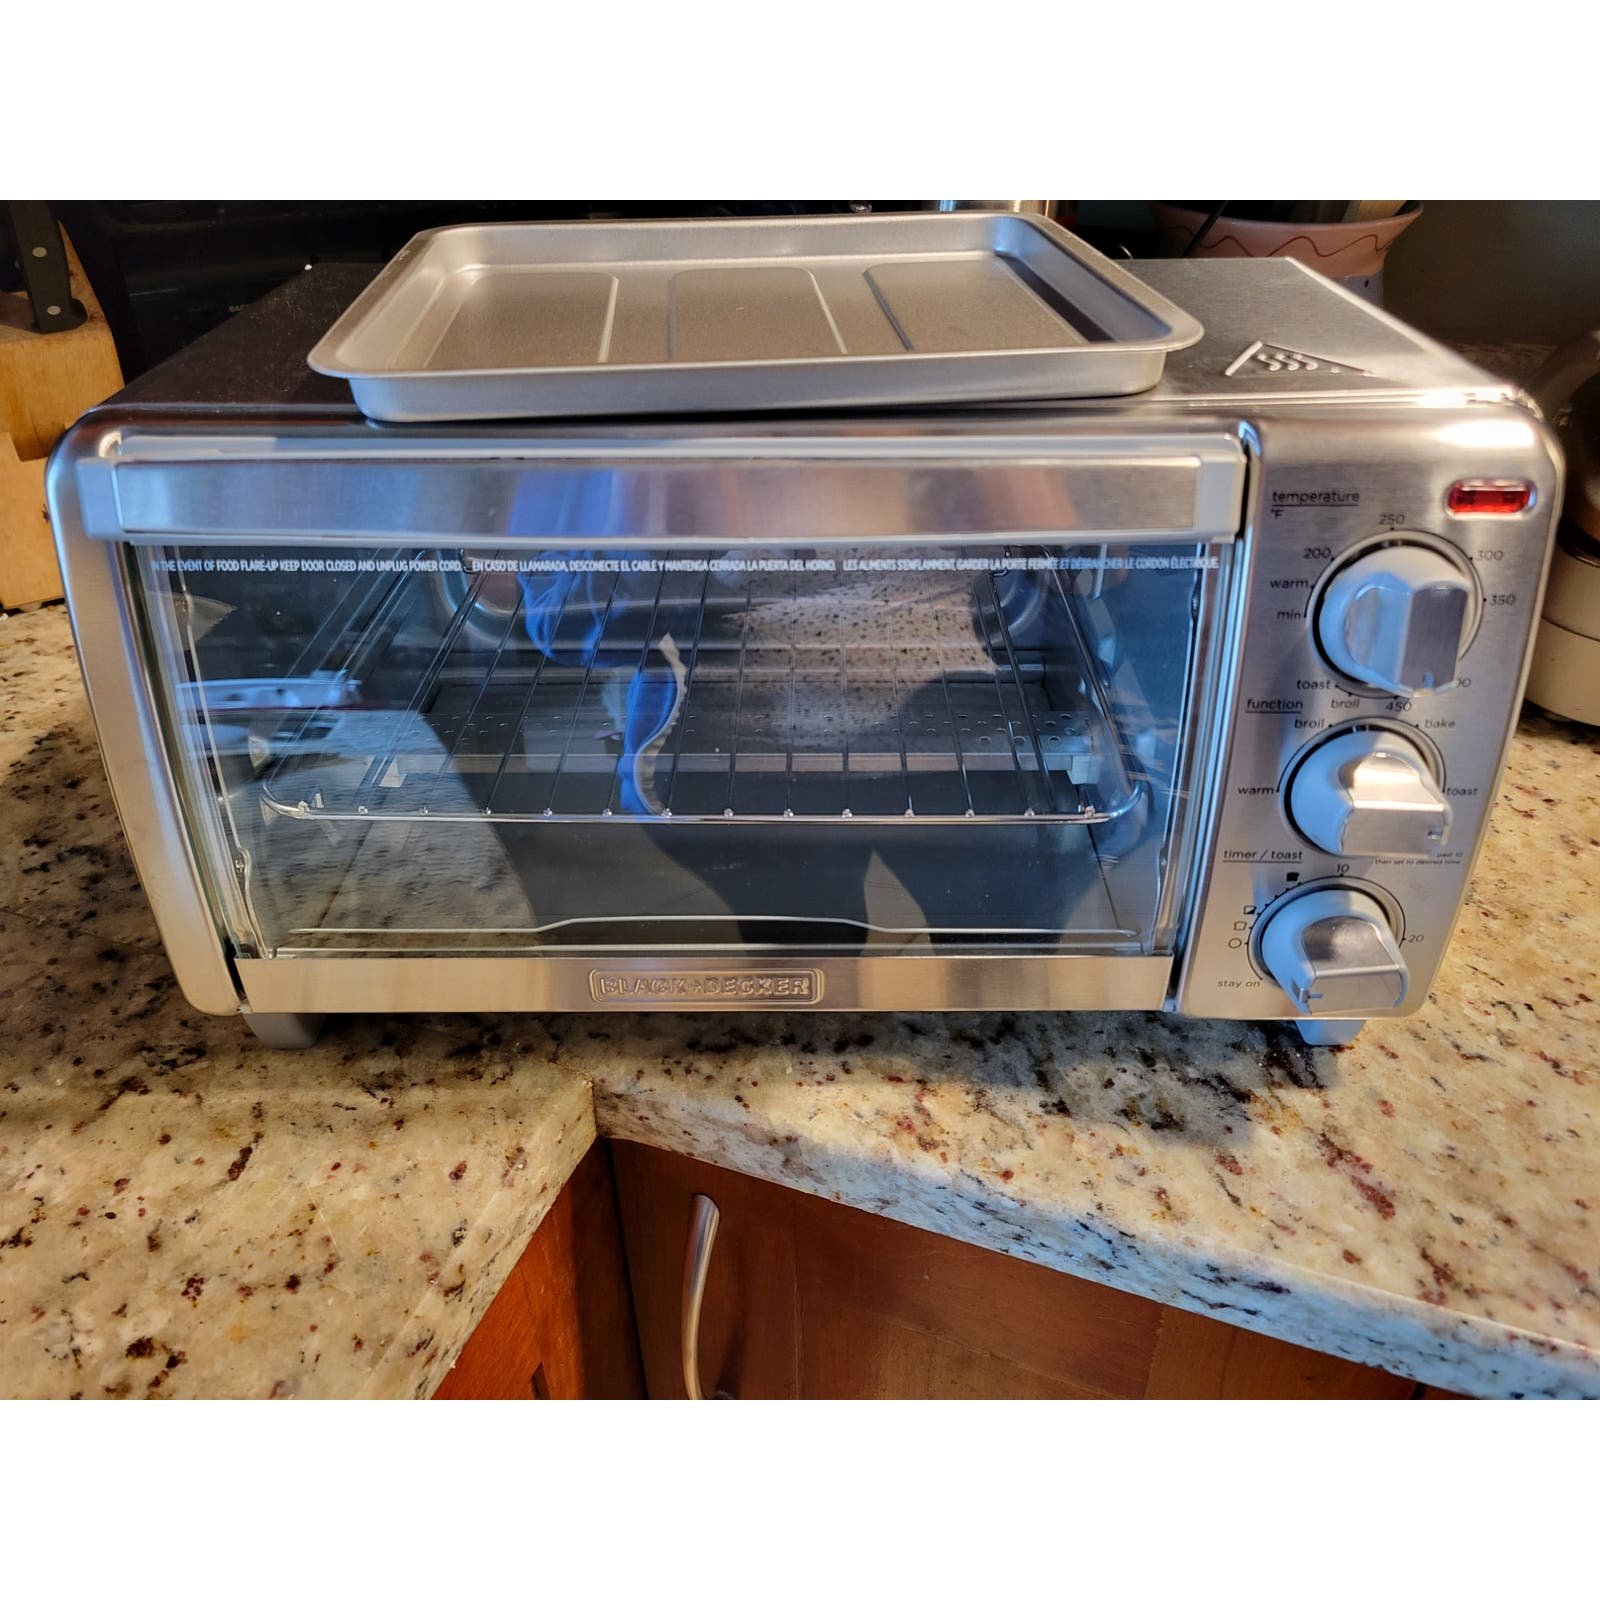 NWOT BLACK+DECKER 4-Slice Toaster Oven, Convection Bake, Broil Stay Warm fTIyzuWy9